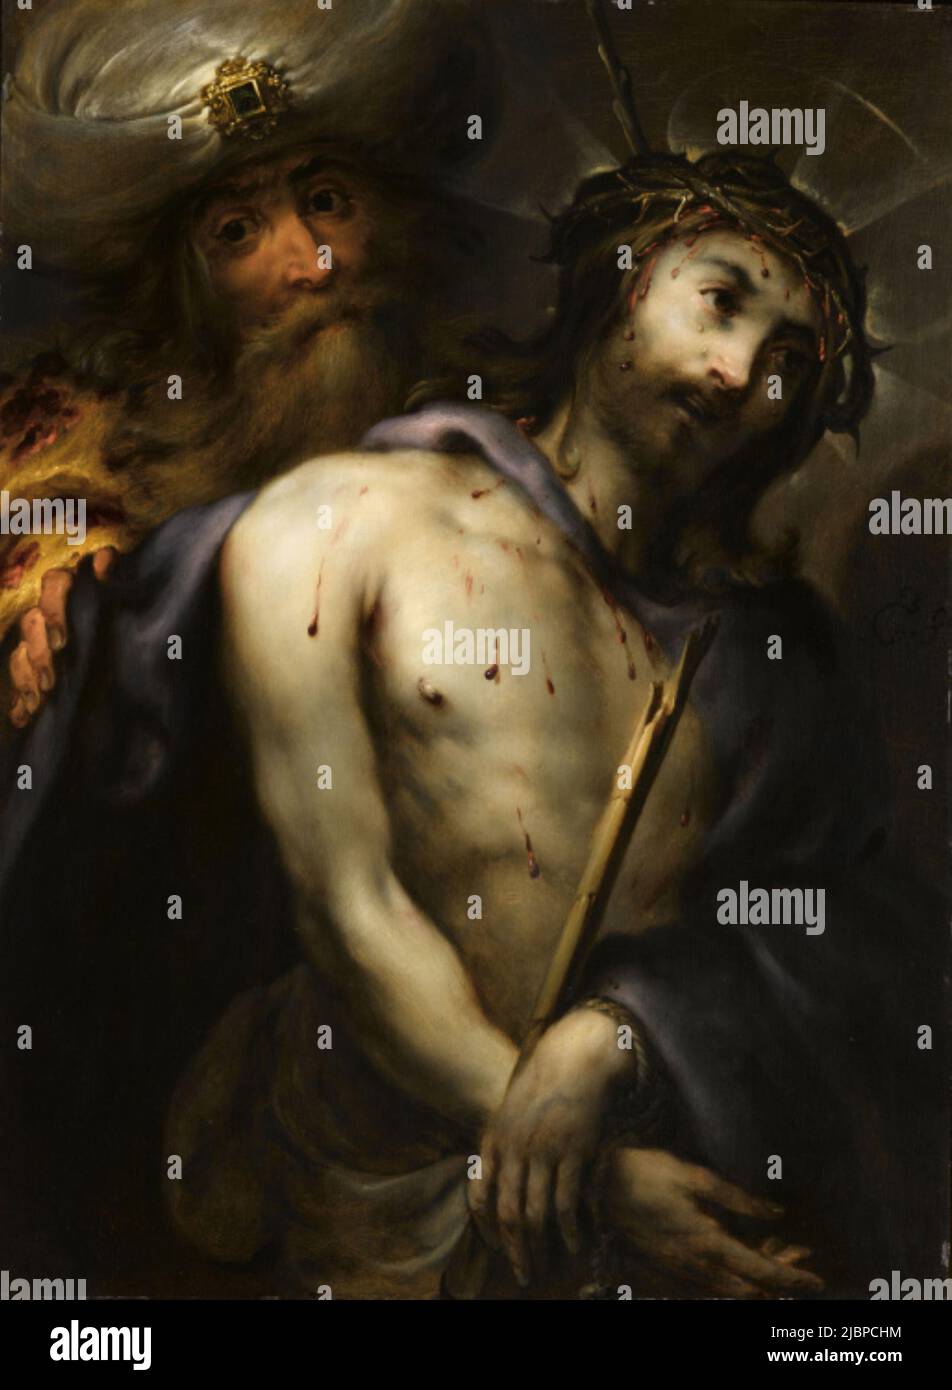 Ecce Homo by Jan Cossiers (1600-1671). The painting depicts the moment when Pontius Pilate presents a beaten and whipped Jesus to the crowd with the words Ecce Homo (Behold the man). Jesus has the crown of thorns on his head and a red or purple robe (to mock the claim to be king of the jews). Stock Photo